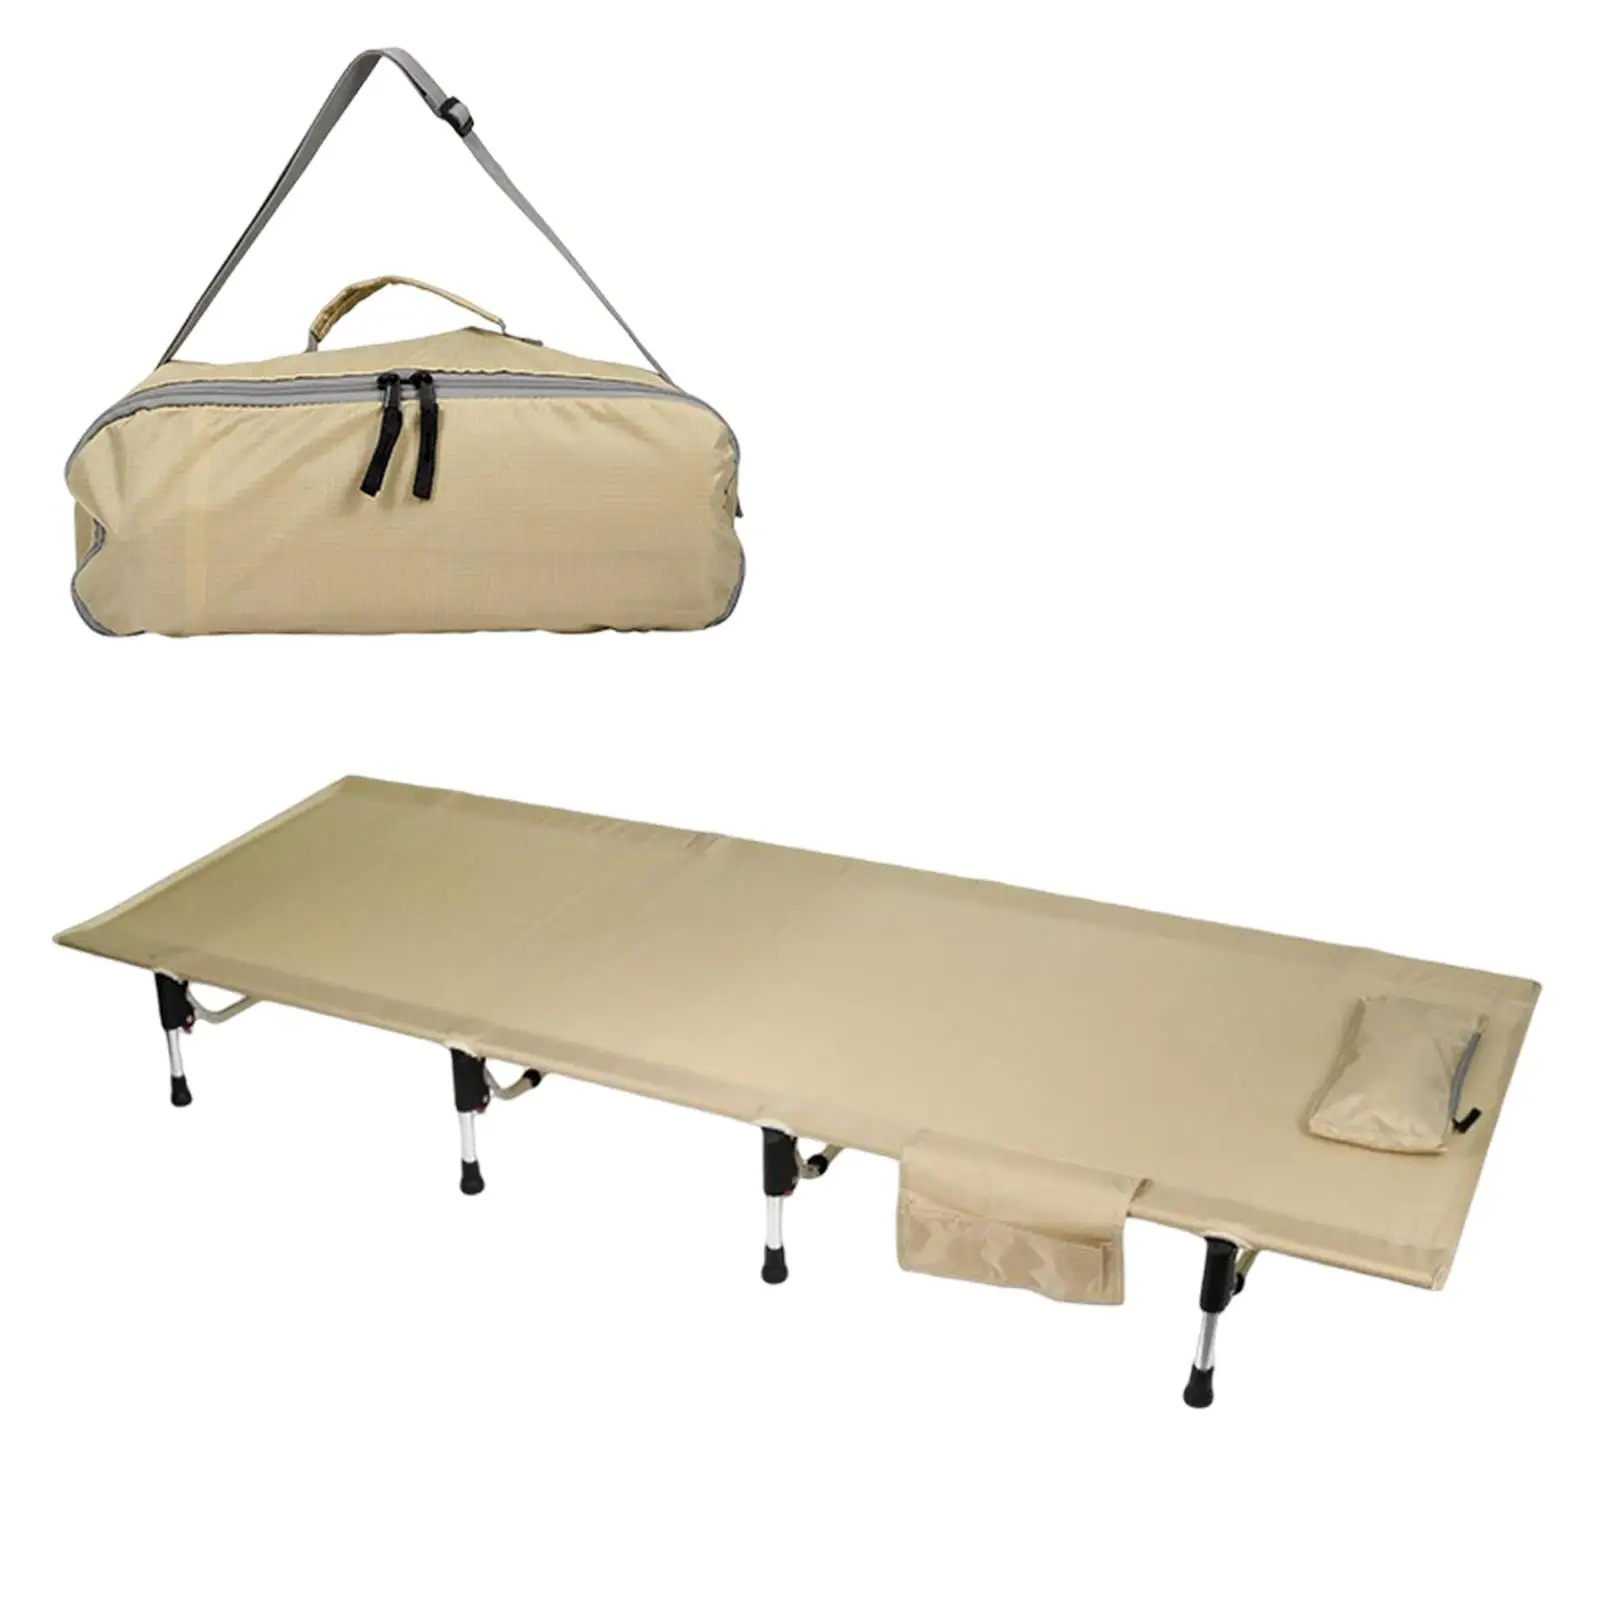 Portable Folding Camping Cot Heavy Duty Sleeping Bed for Outdoor Beach